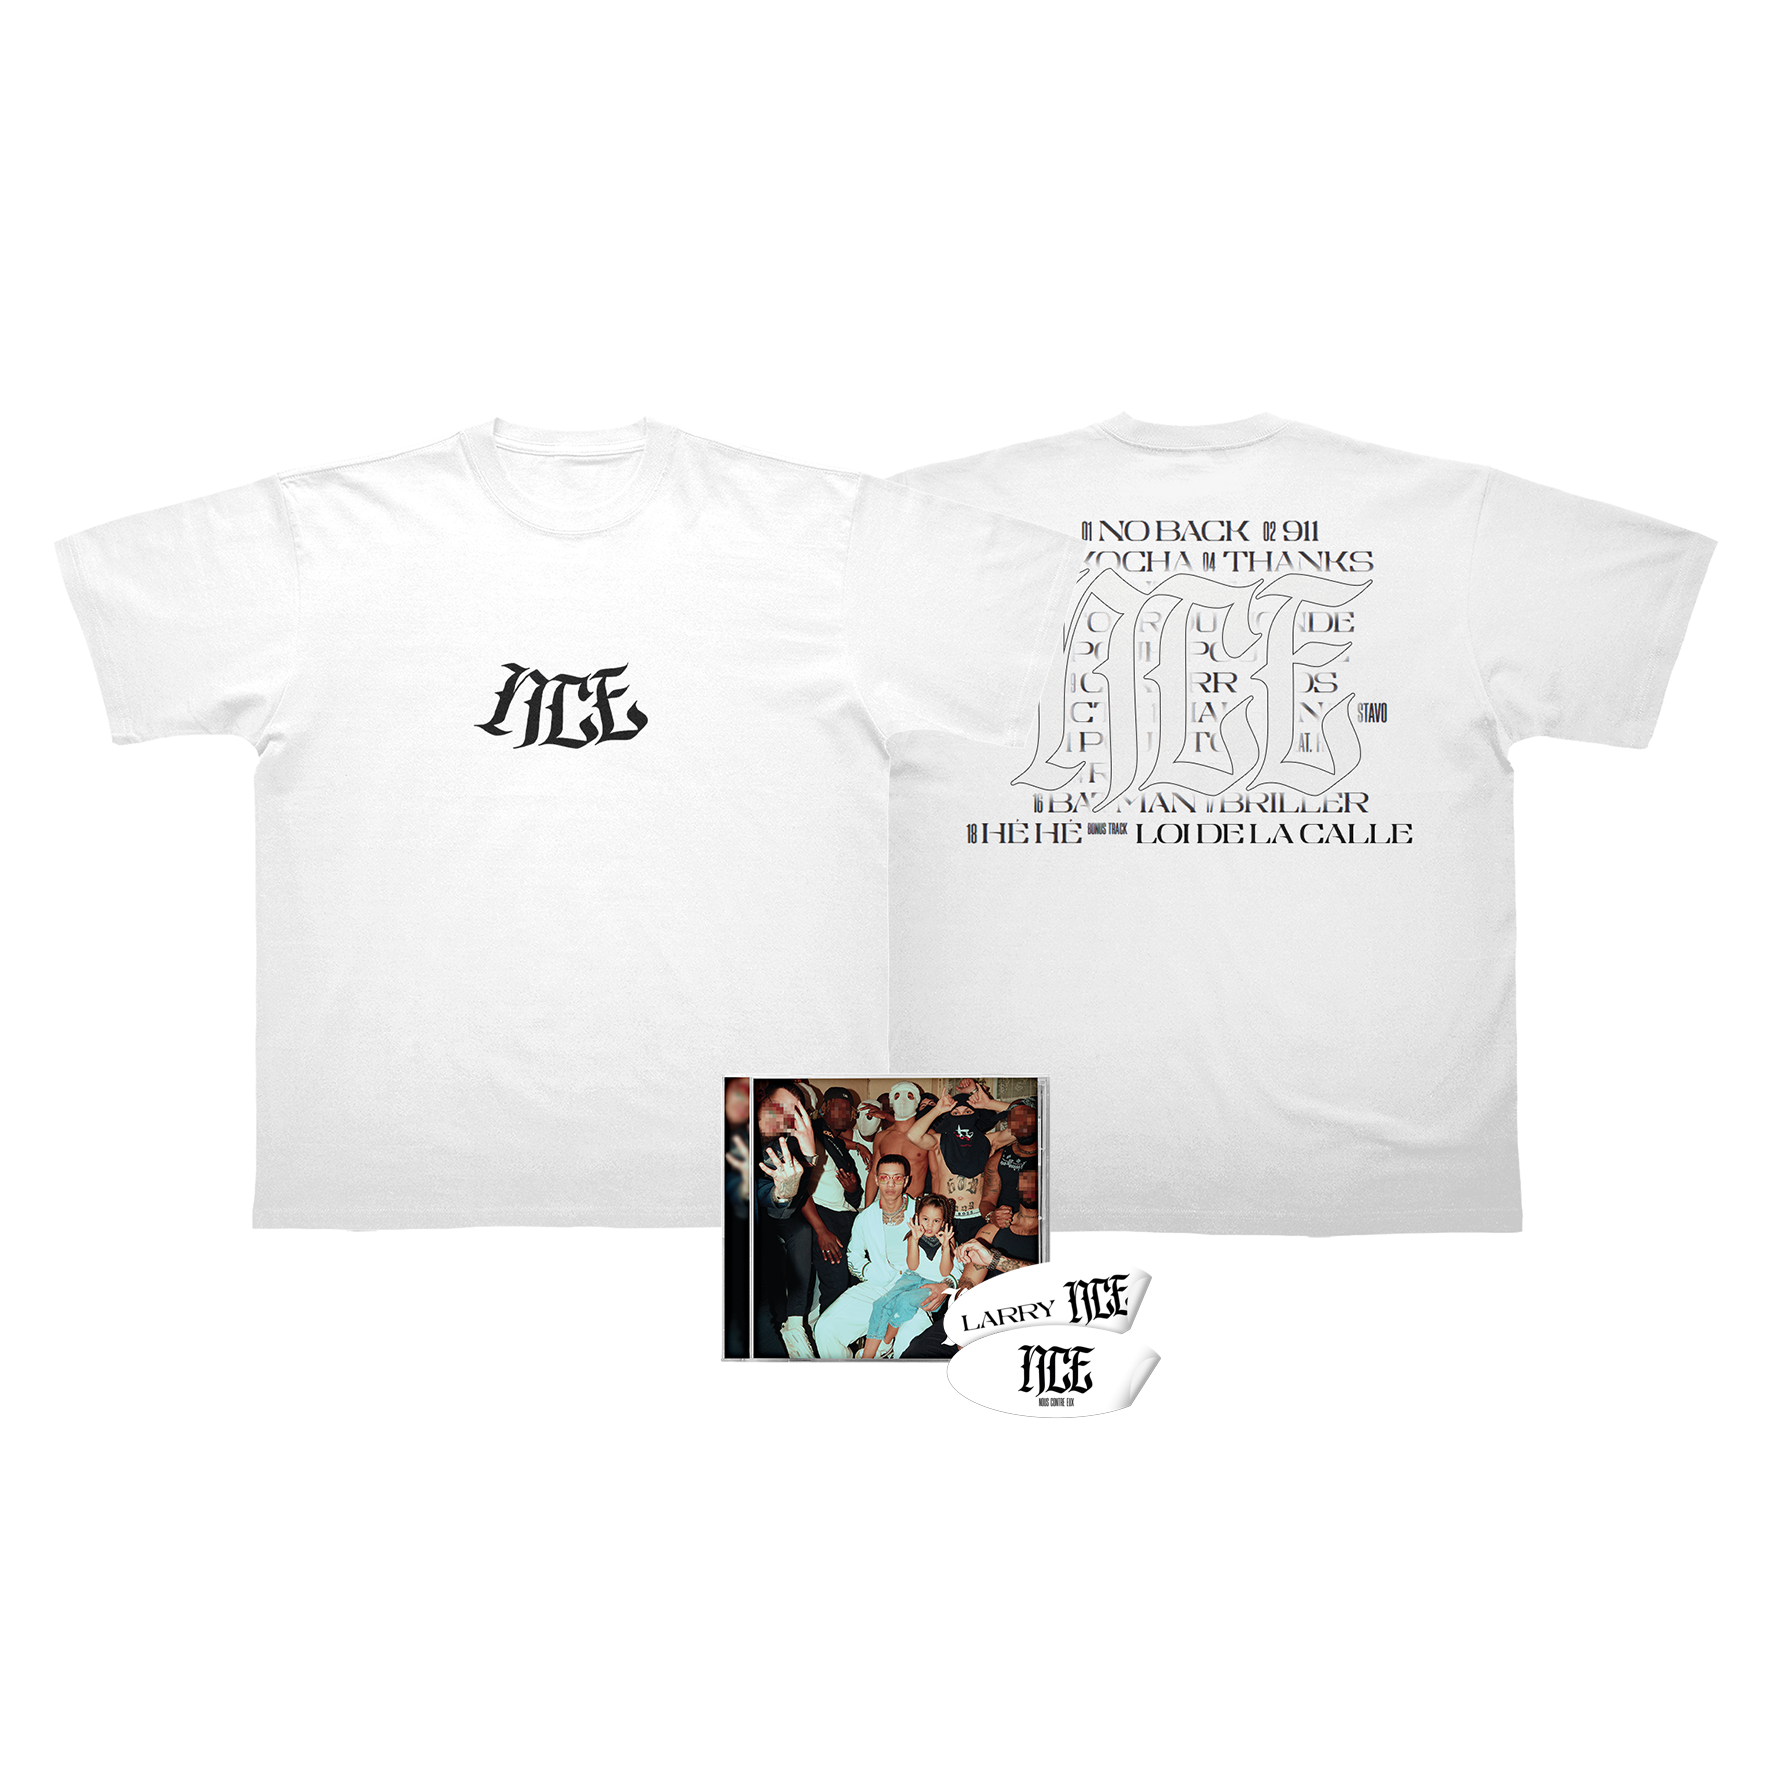 PACK CD "NCE" ÉDITION BLANCHE + T-SHIRT + STICKERS